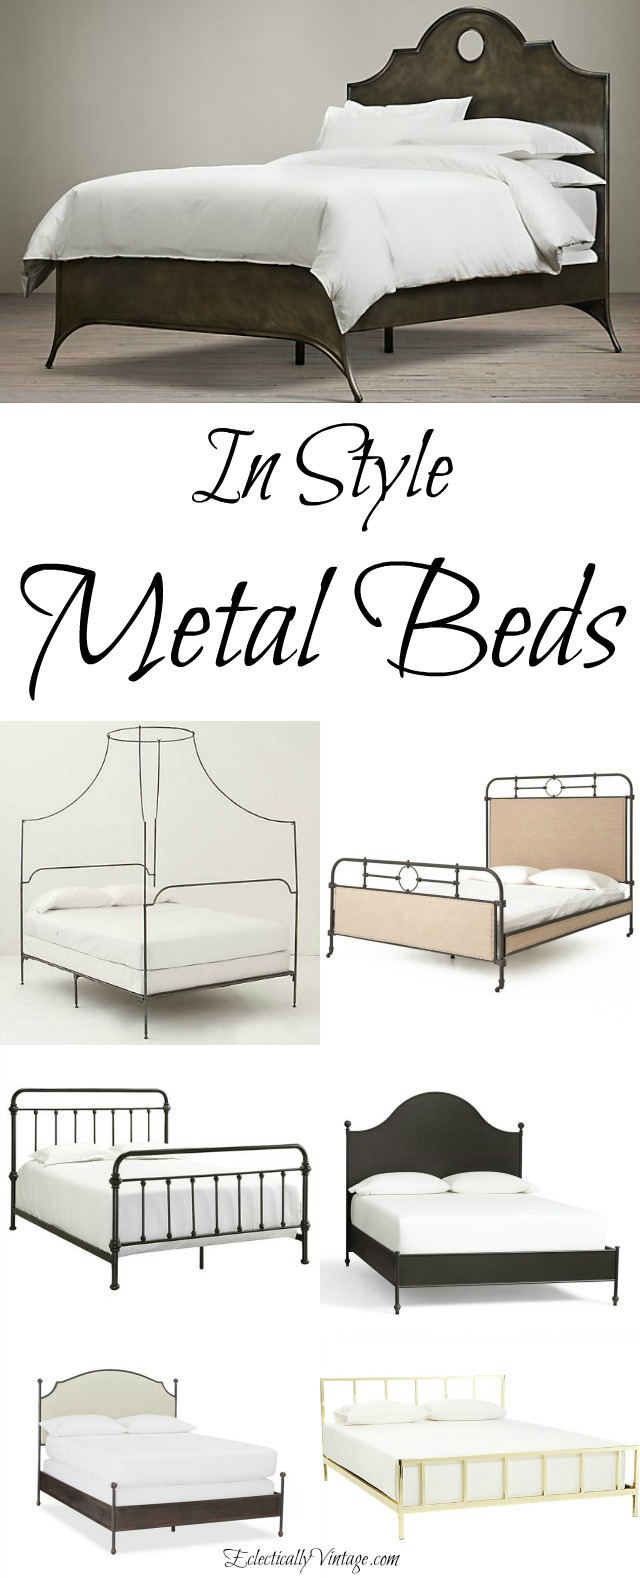 Stylish Metal Beds - love all of these! kellyelko.com